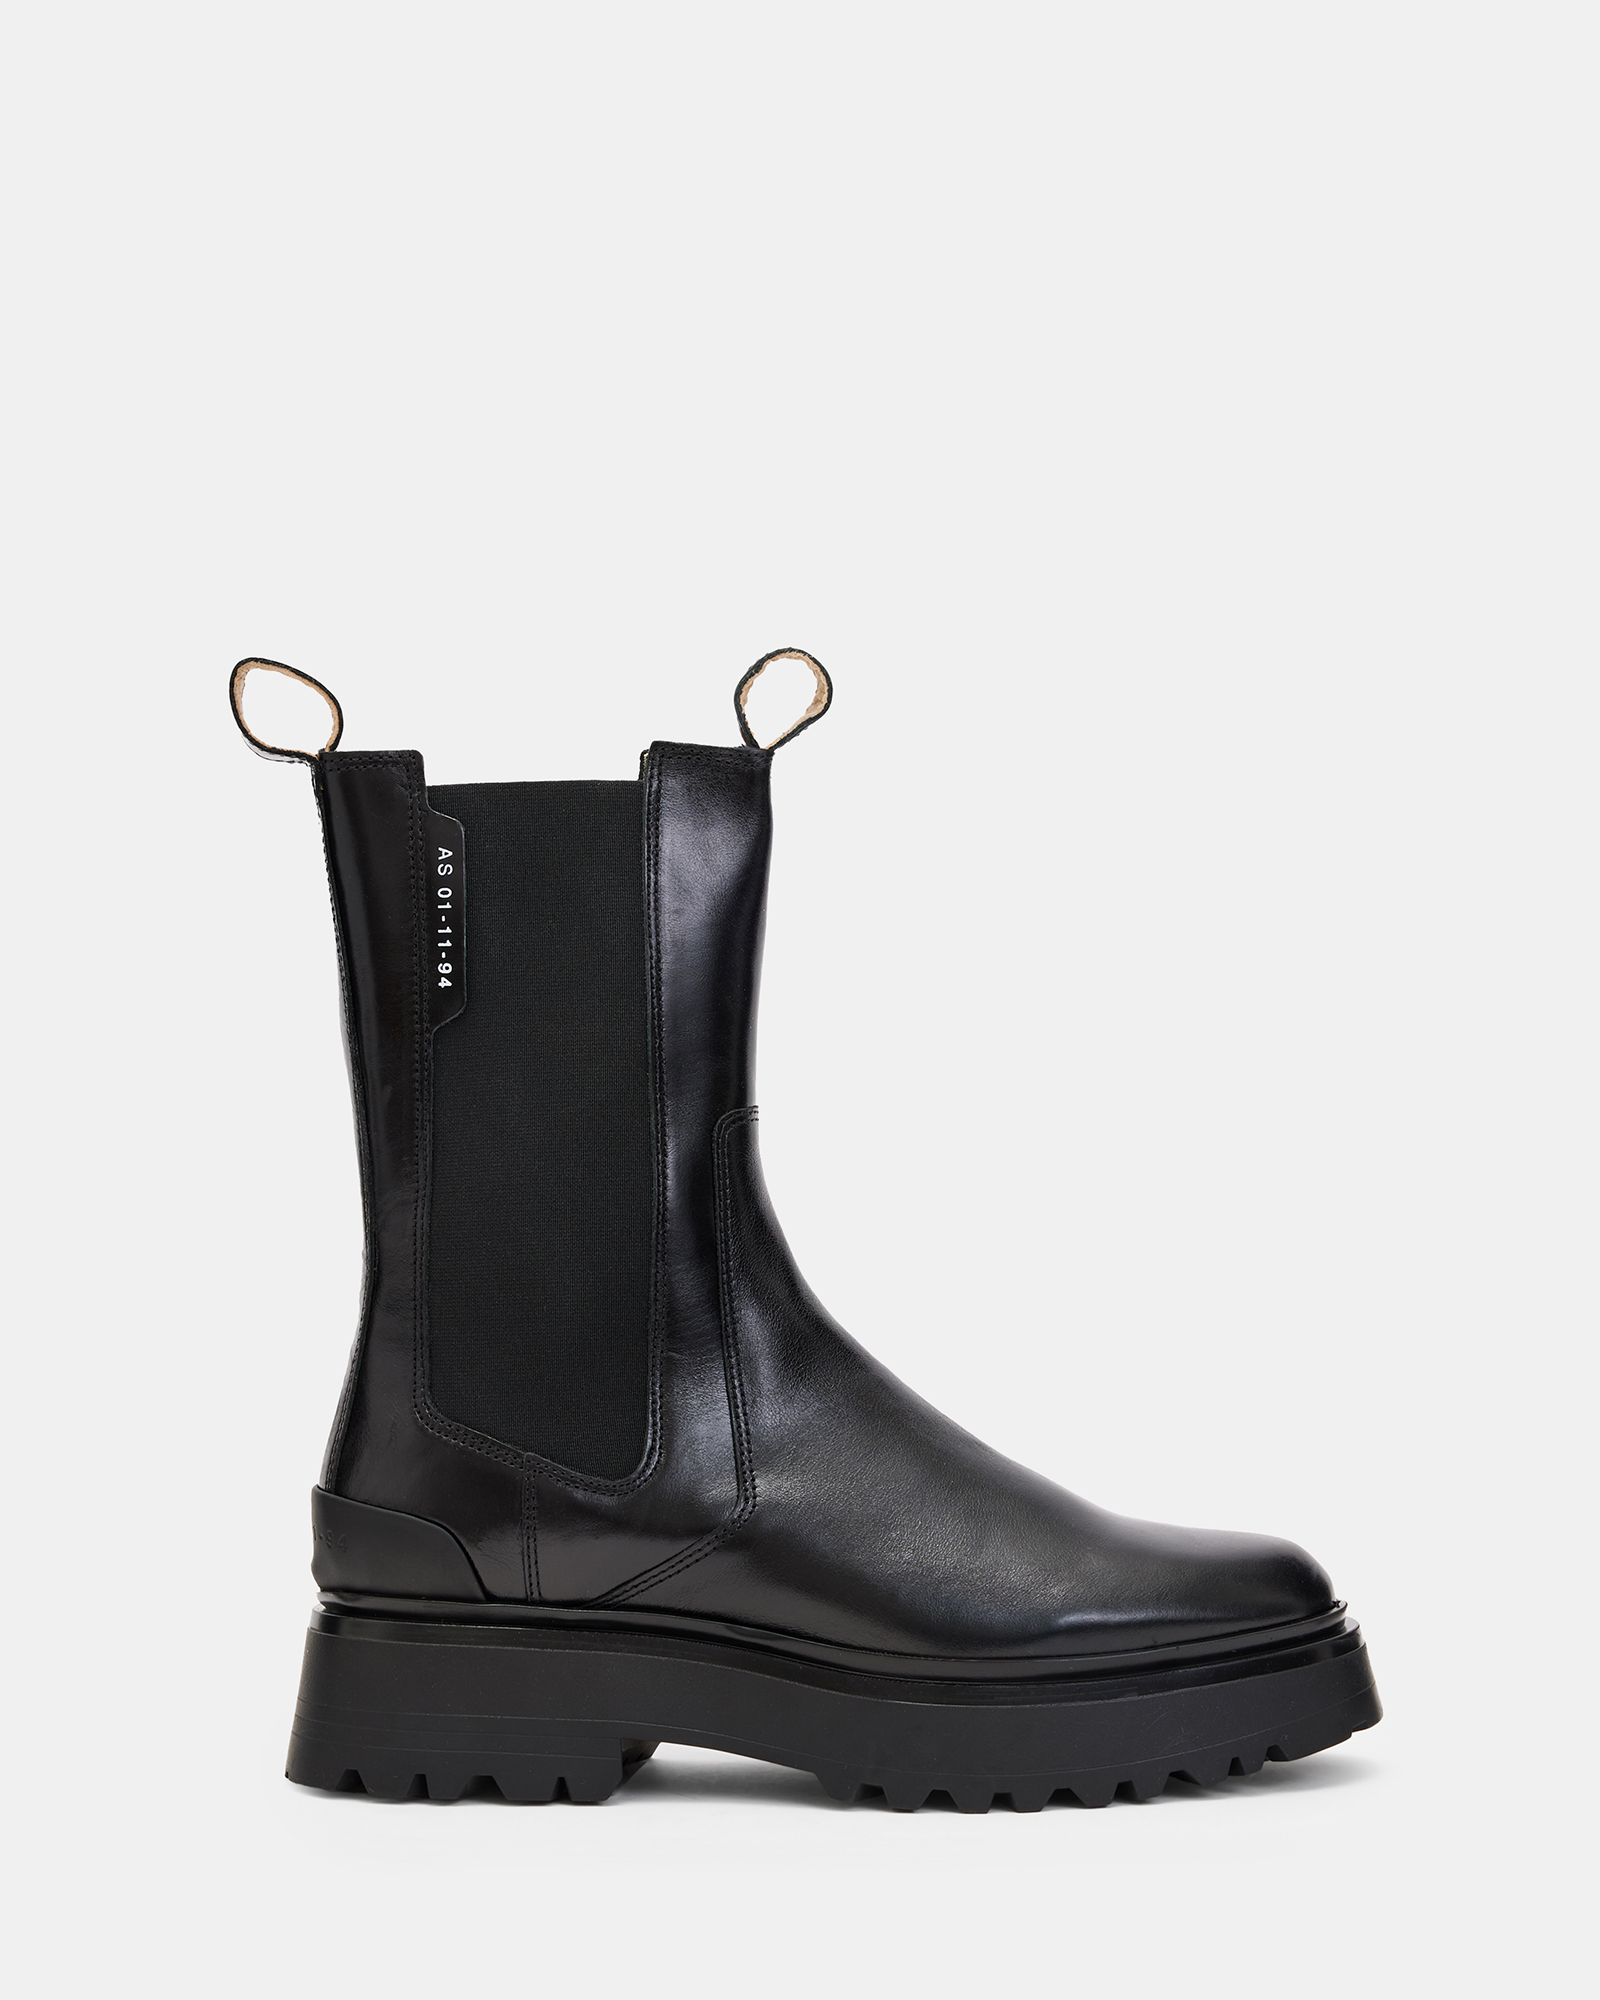 AllSaints Amber Leather Round Toe Boots,, Black